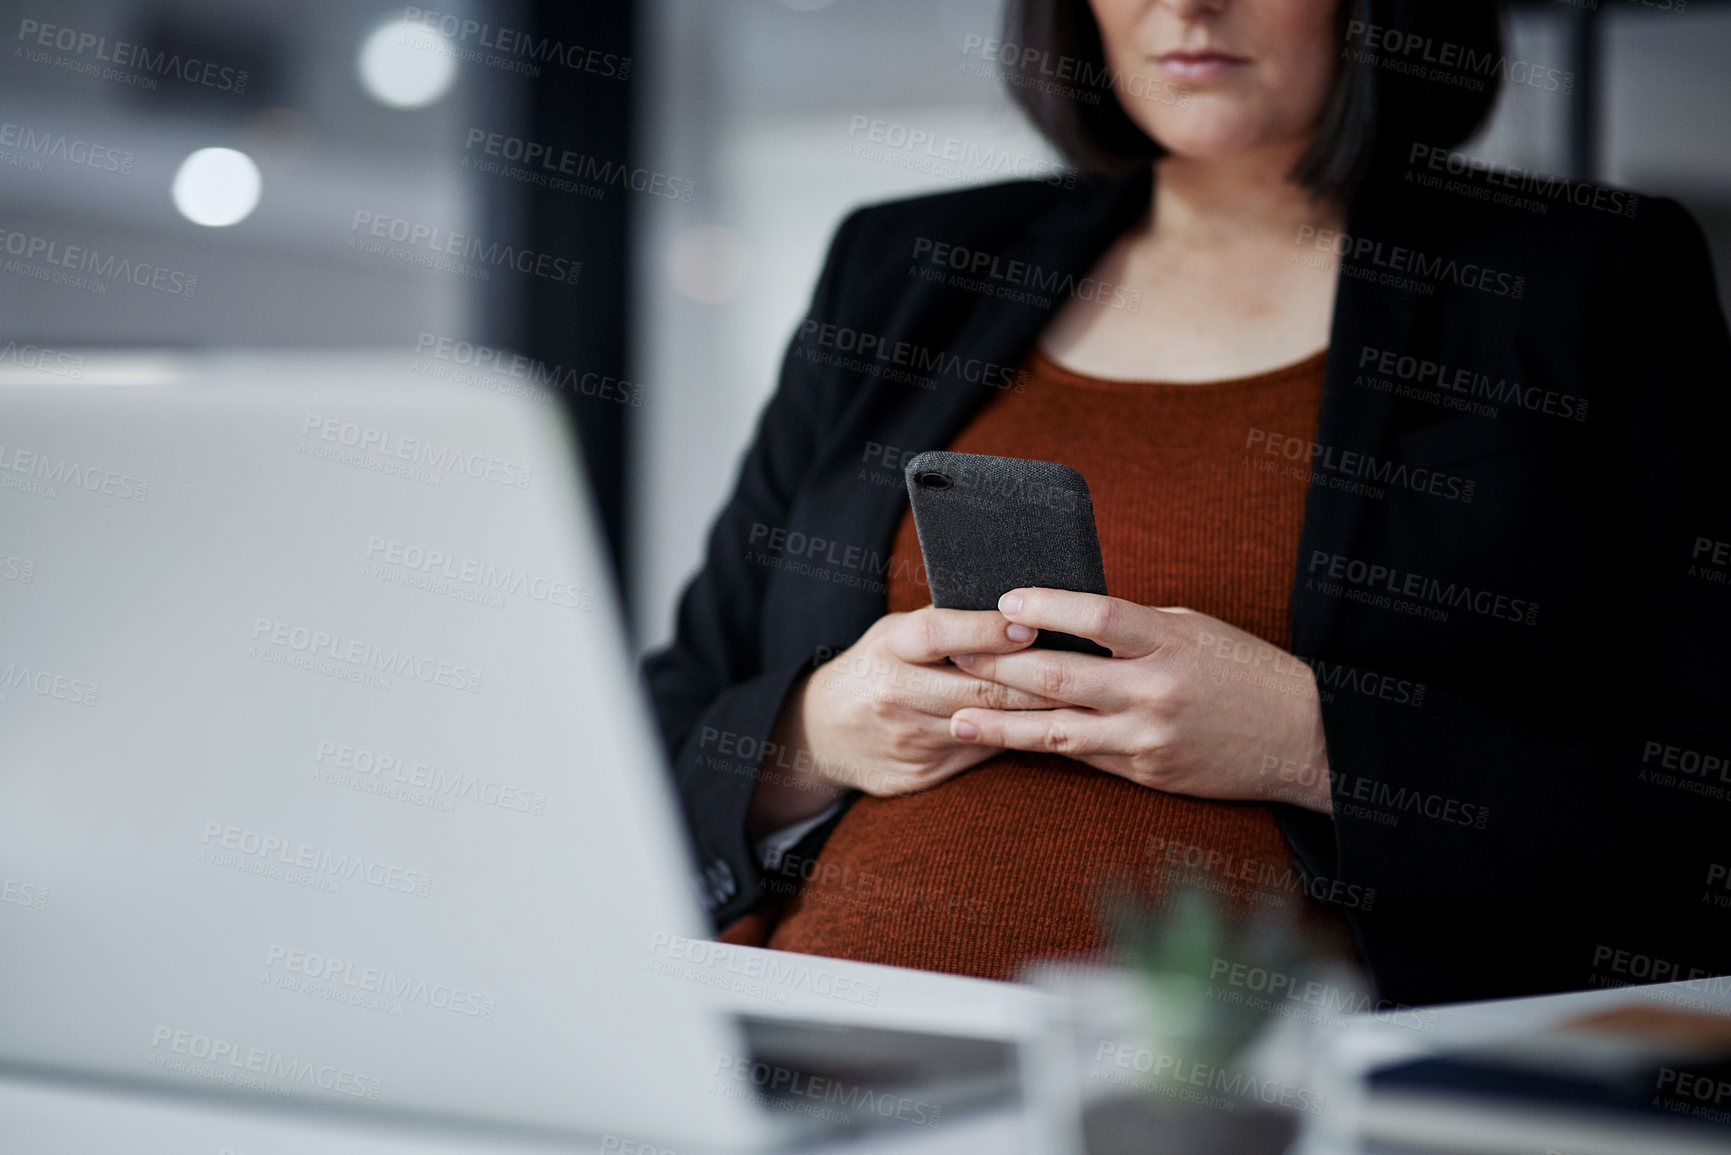 Buy stock photo Cropped shot of an unrecognizable pregnant businesswoman sitting alone and using her cellphone in the office